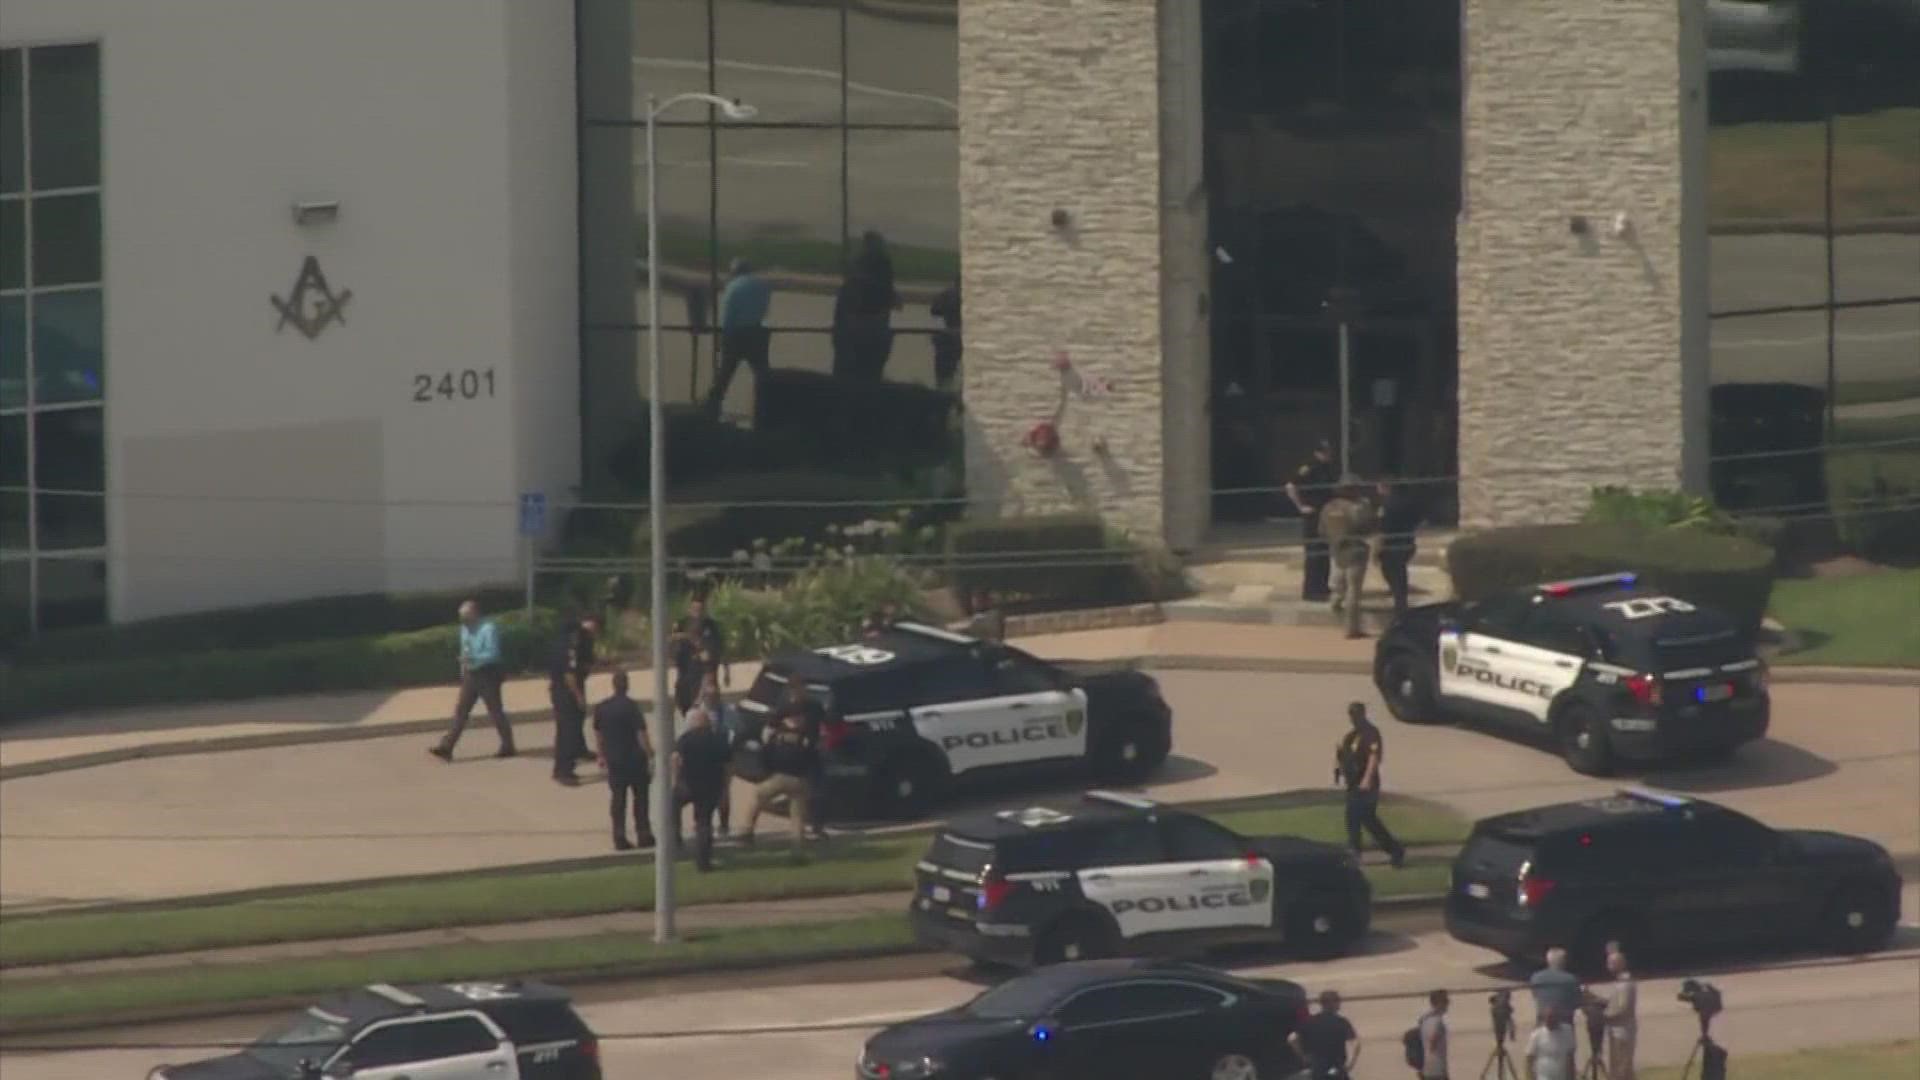 A suspect is in custody following a brief hostage situation inside the Scottish Rite Temple in southwest Houston, according to the Houston Police Department.